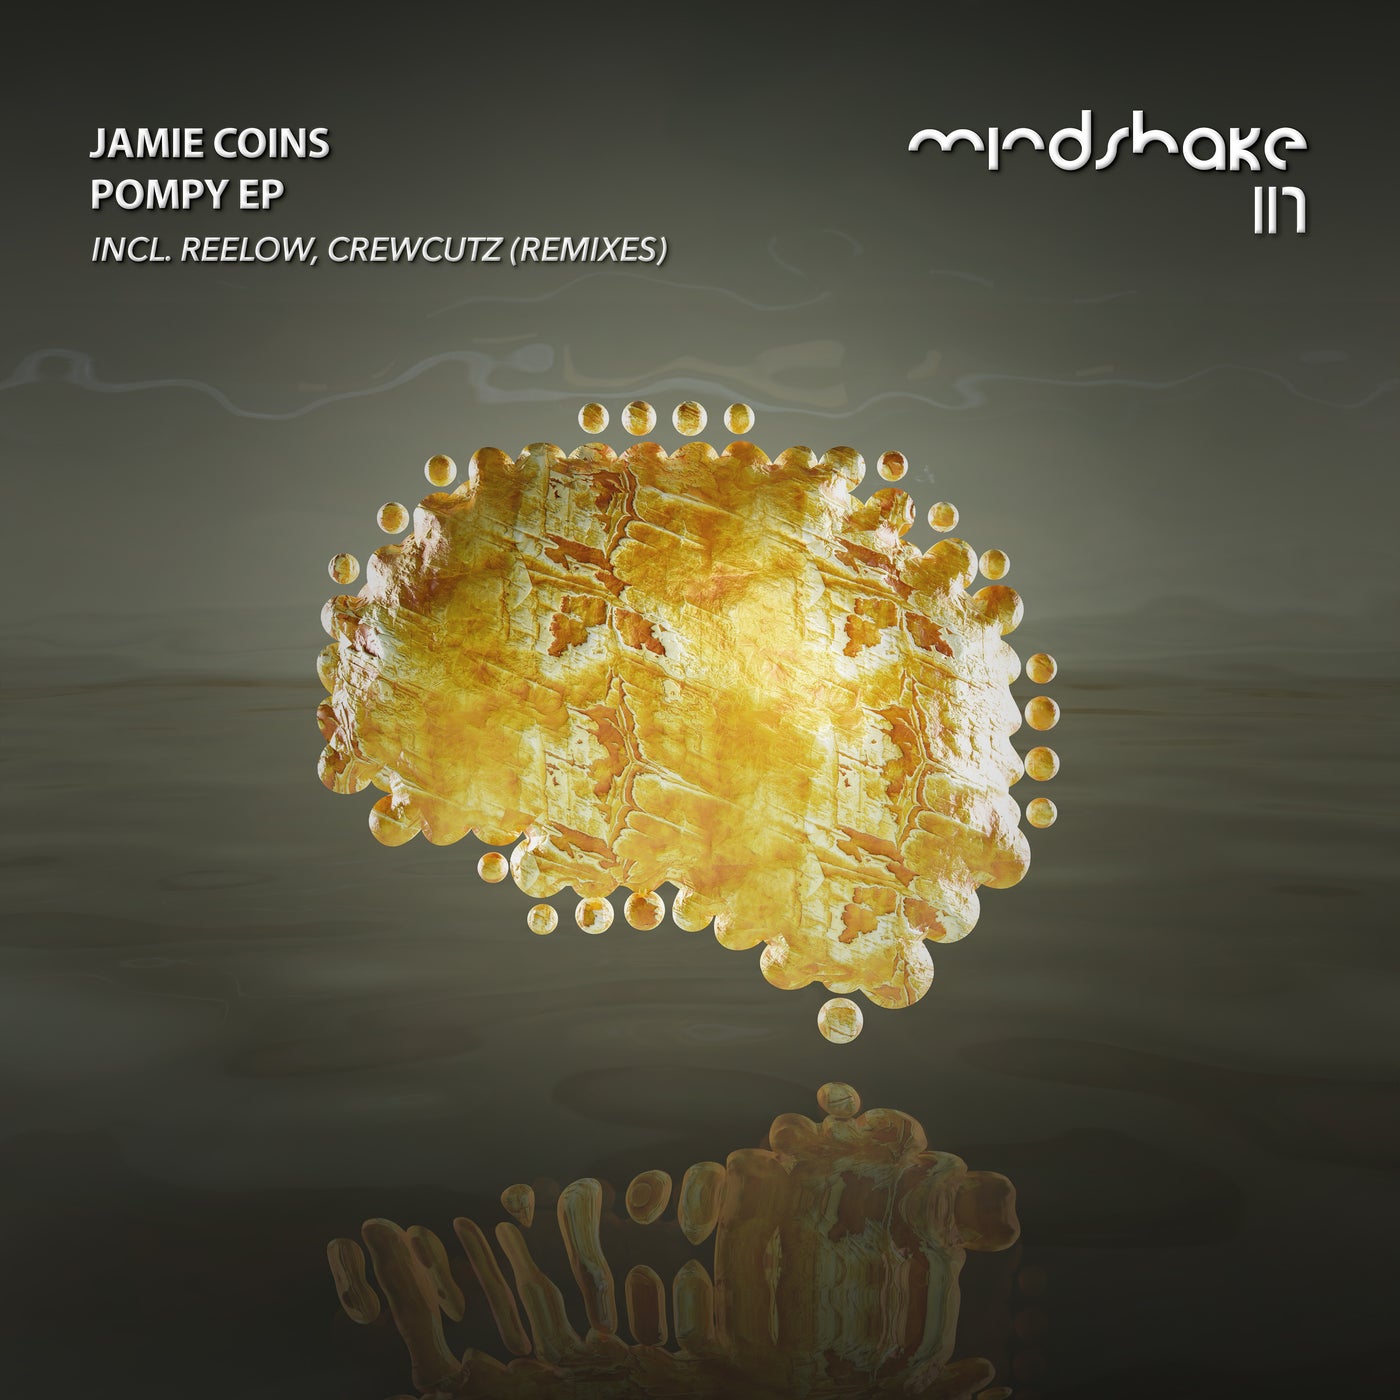 image cover: Jamie Coins - Pompy EP on Mindshake Records